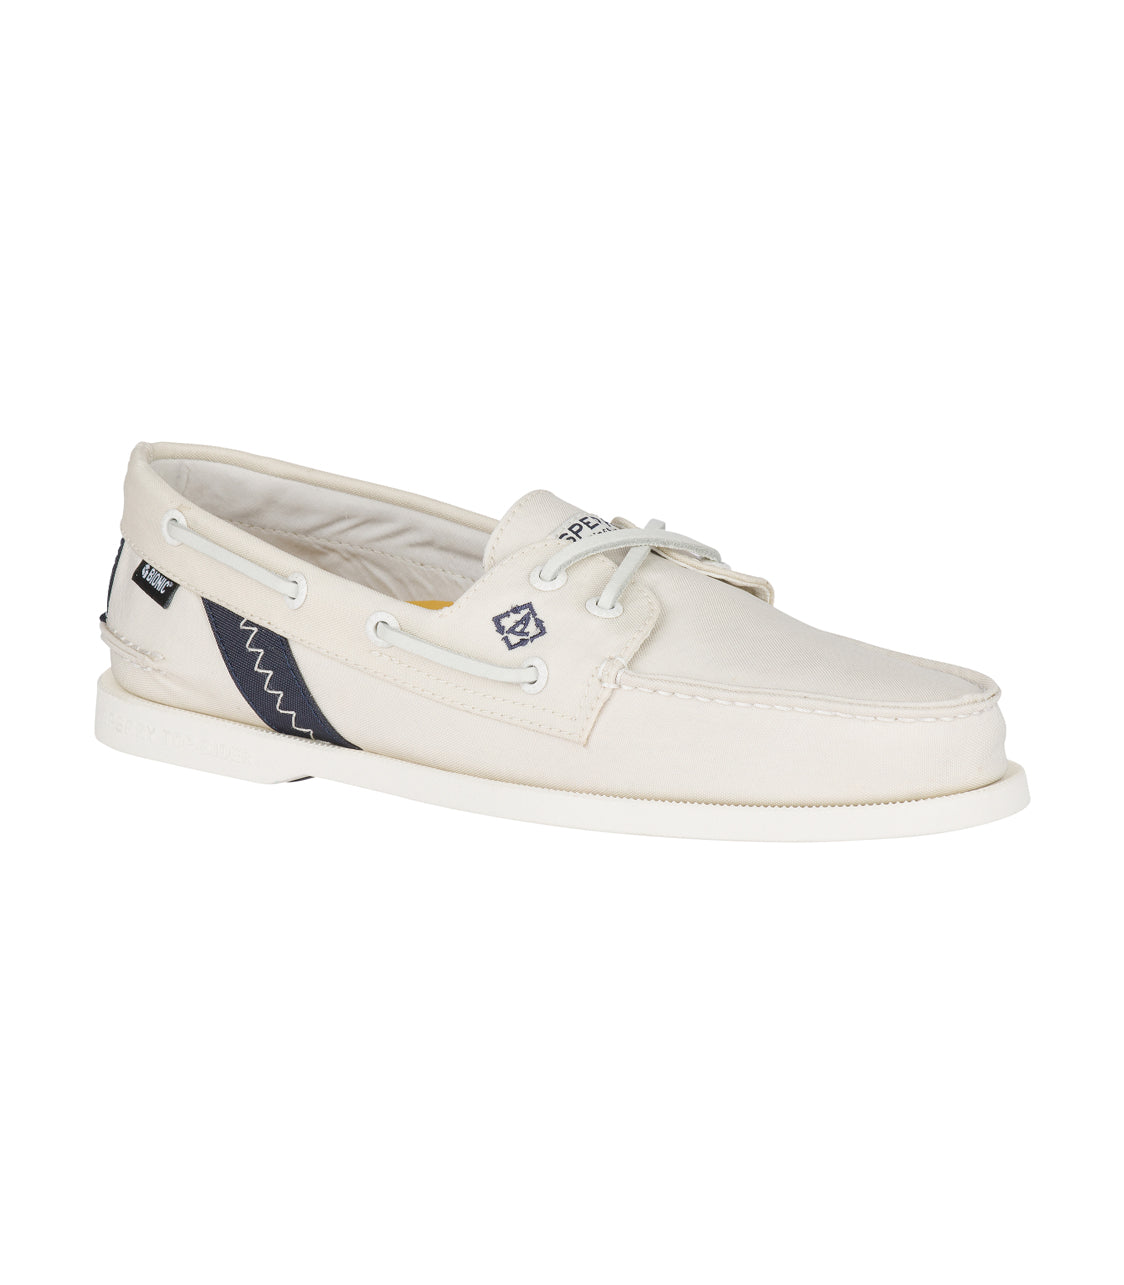 Sperry Men's A/O 2-eye Bionic / Off White (STS215810)